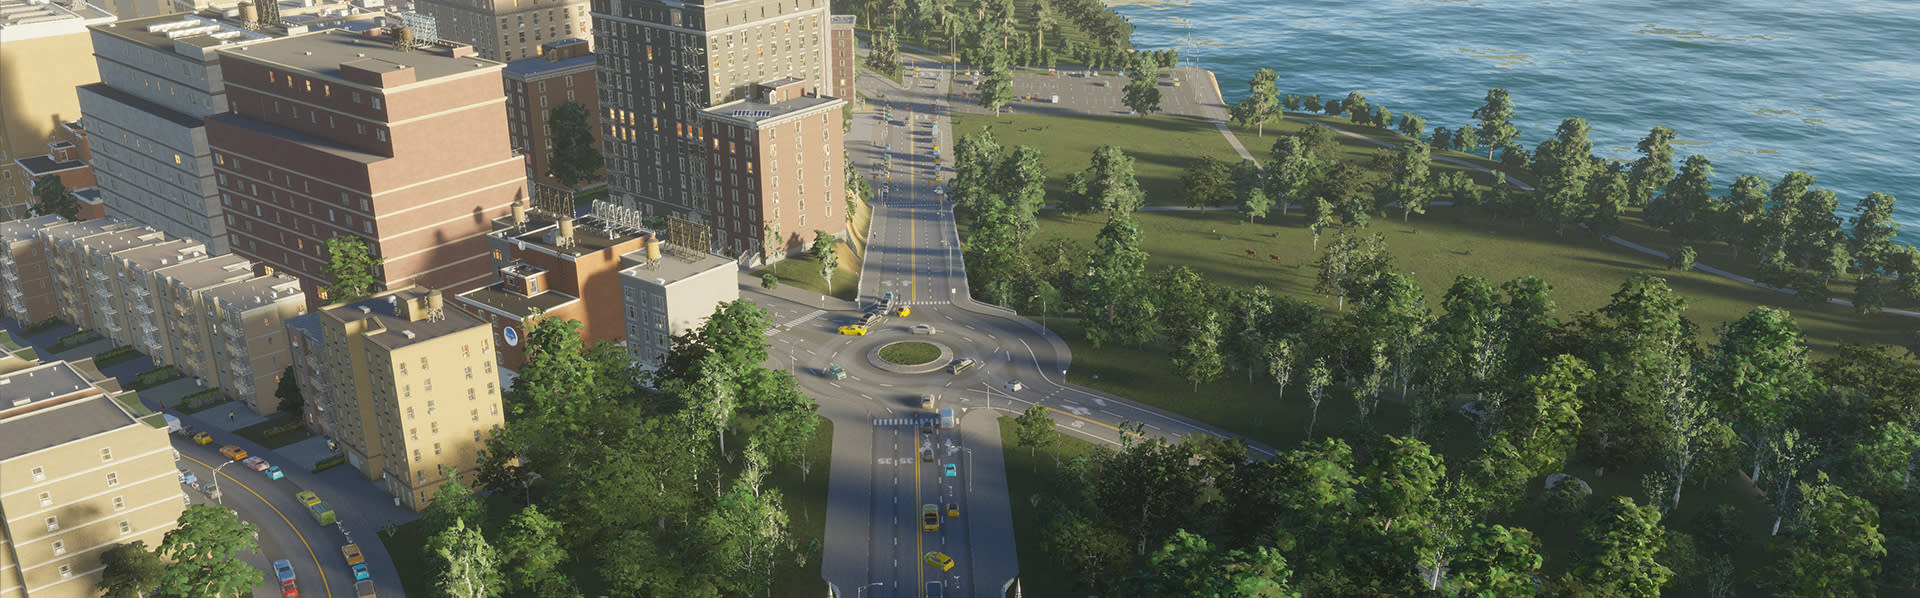 Cities Skylines 2 road building is amazing, so come see it in action